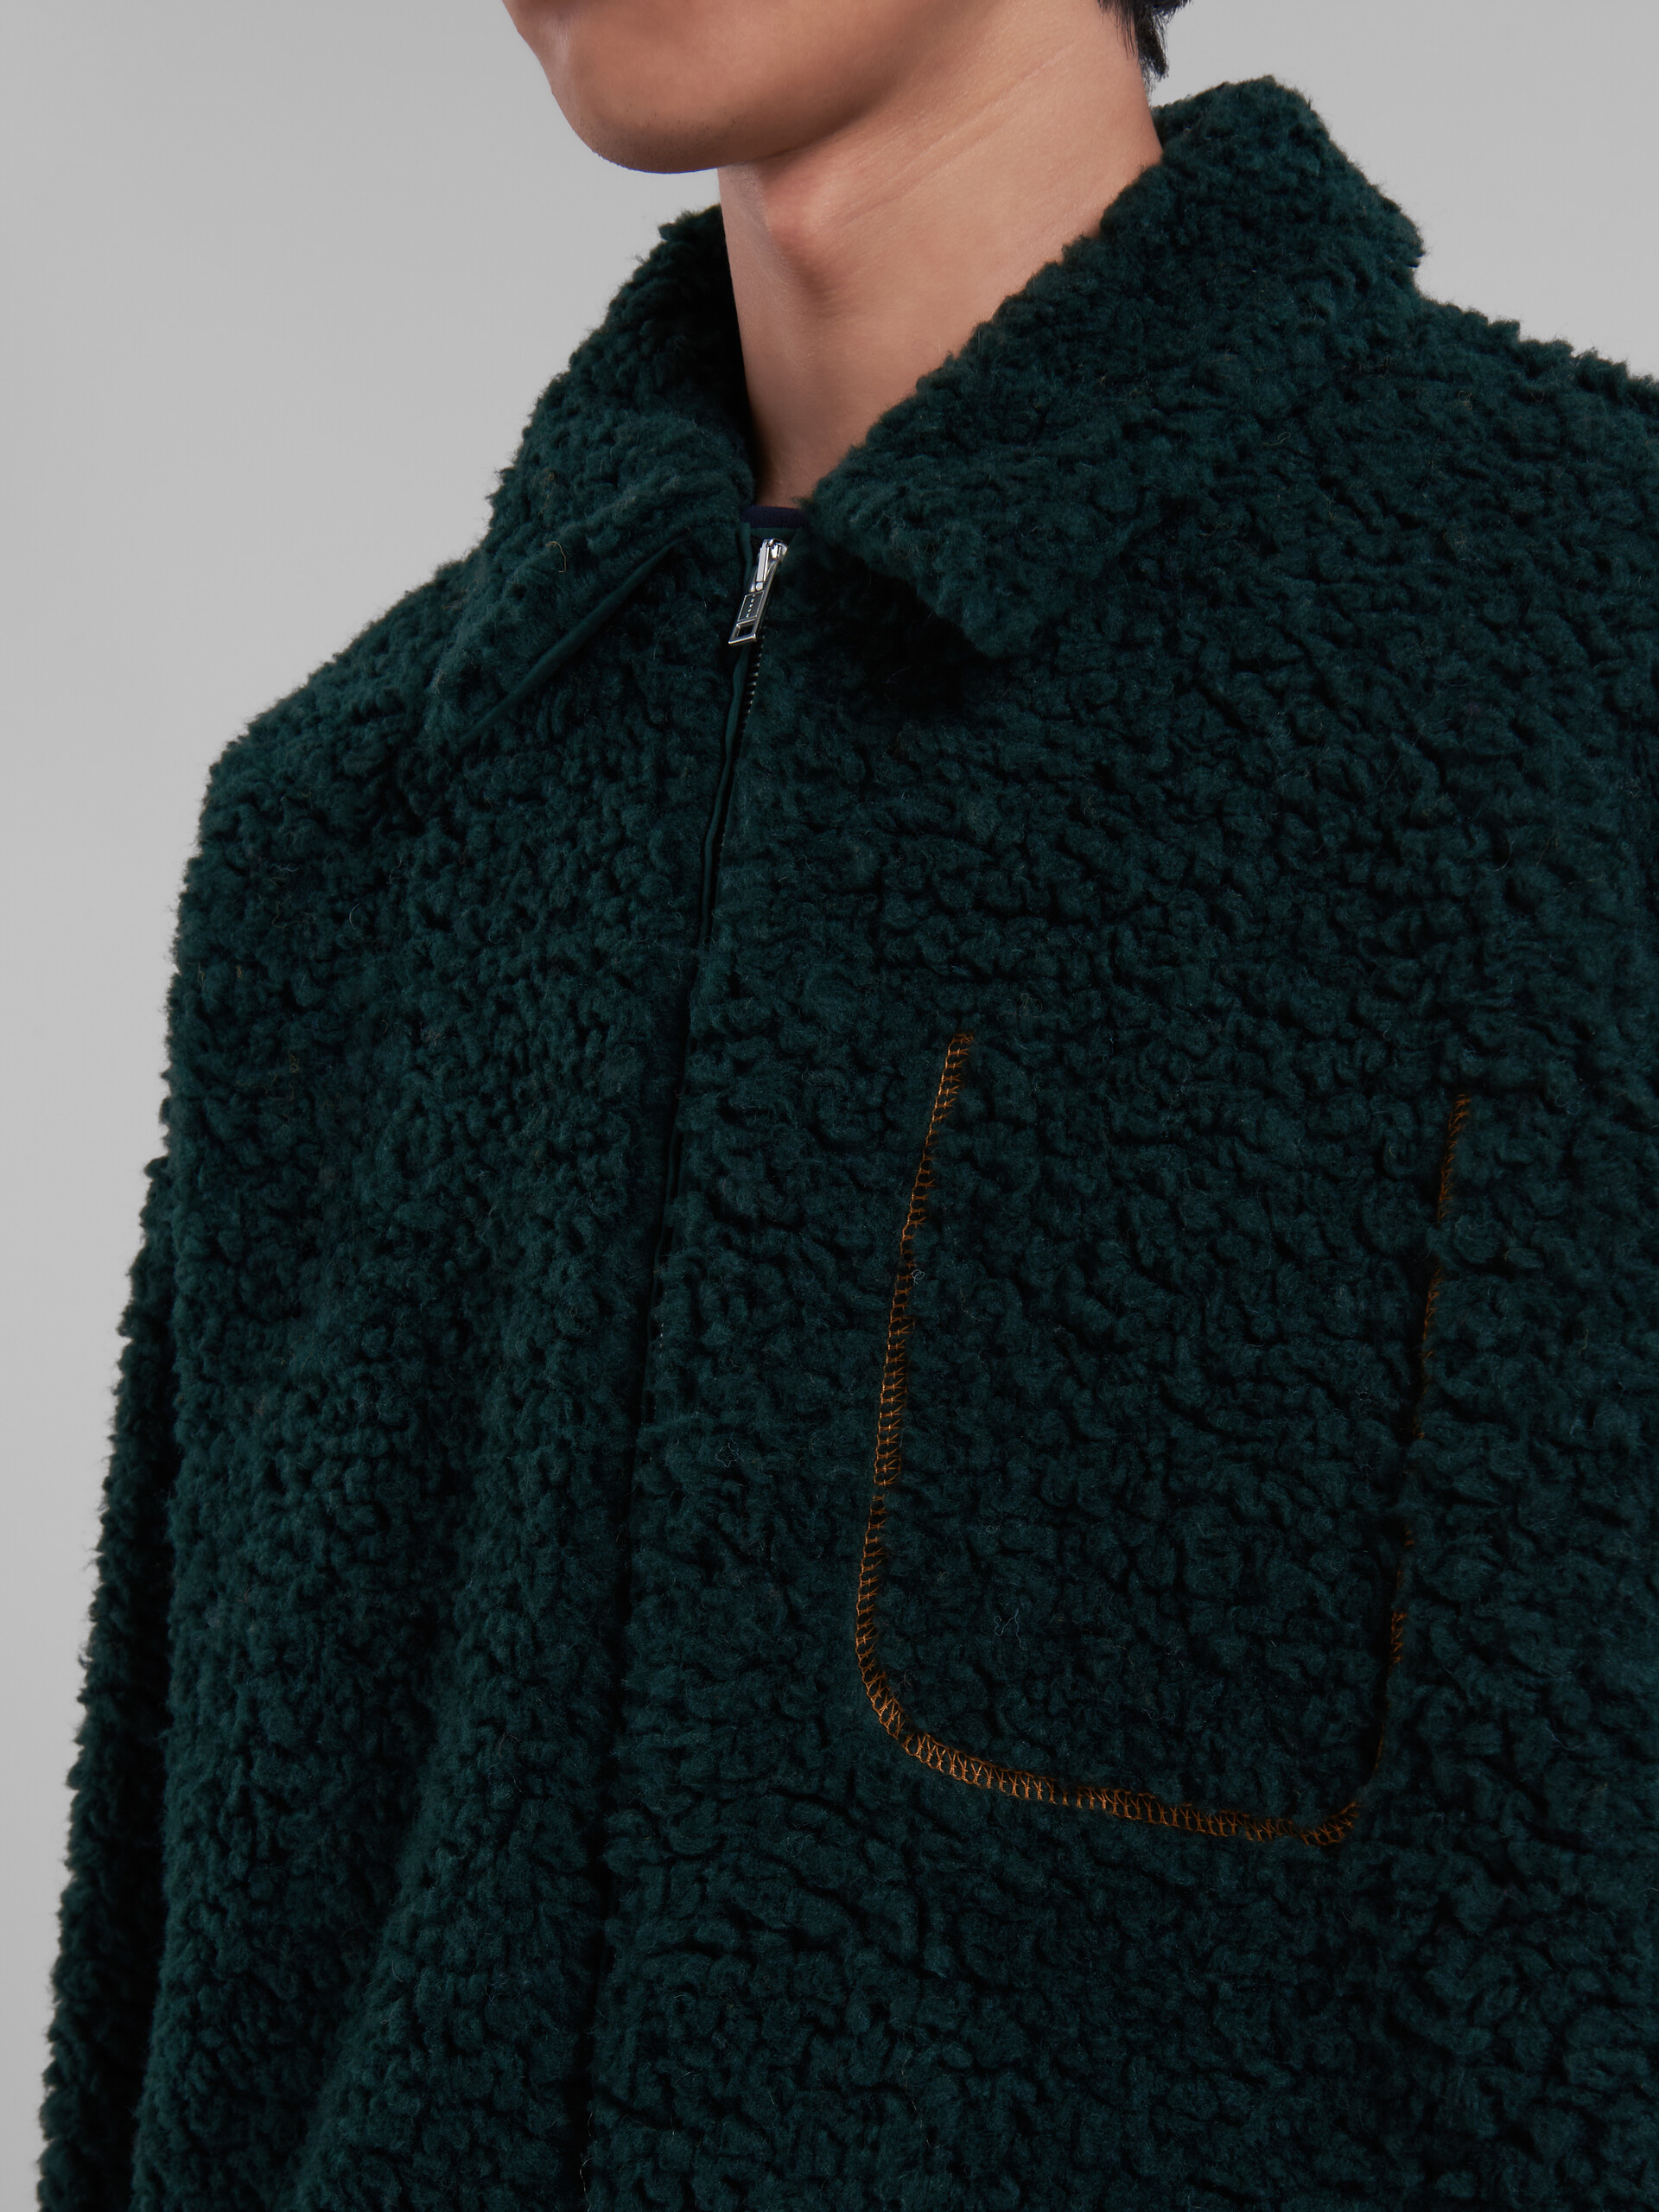 Green teddy jacket with contrast stitching - Jackets - Image 5